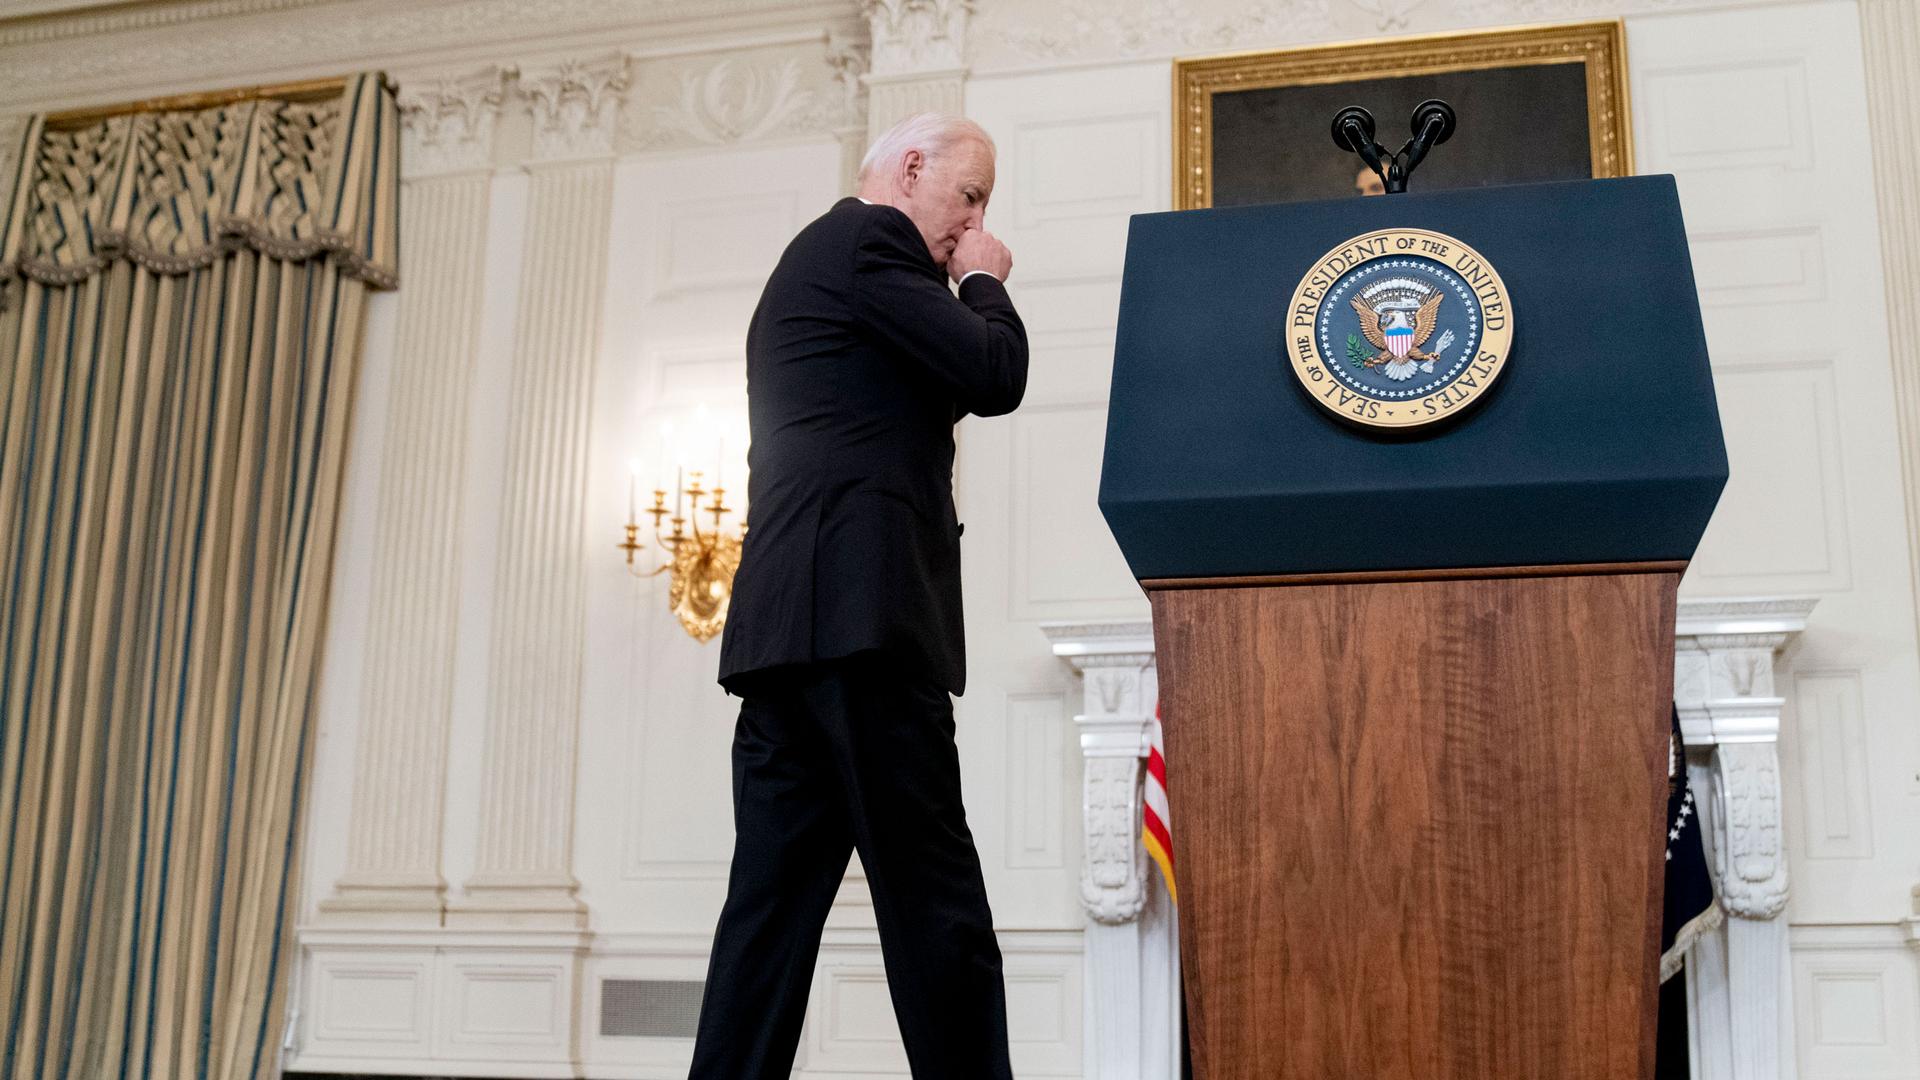 US President Joe Biden is shown wearing a dark suit and walking toward a podium with the President of the United States seal on it.